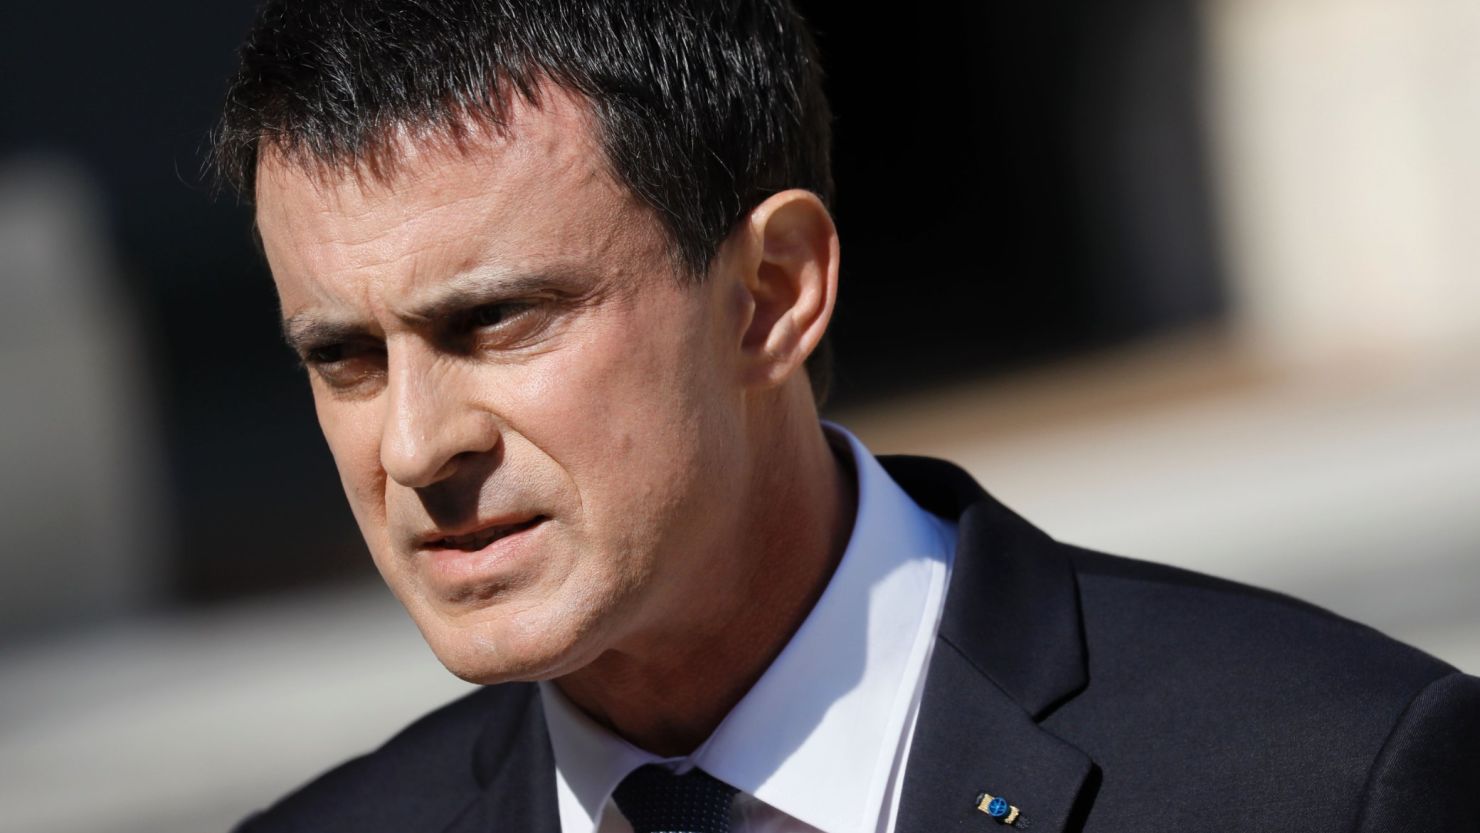 French Prime Minister Manuel Valls speaks in July at the Elysee Palace in Paris.